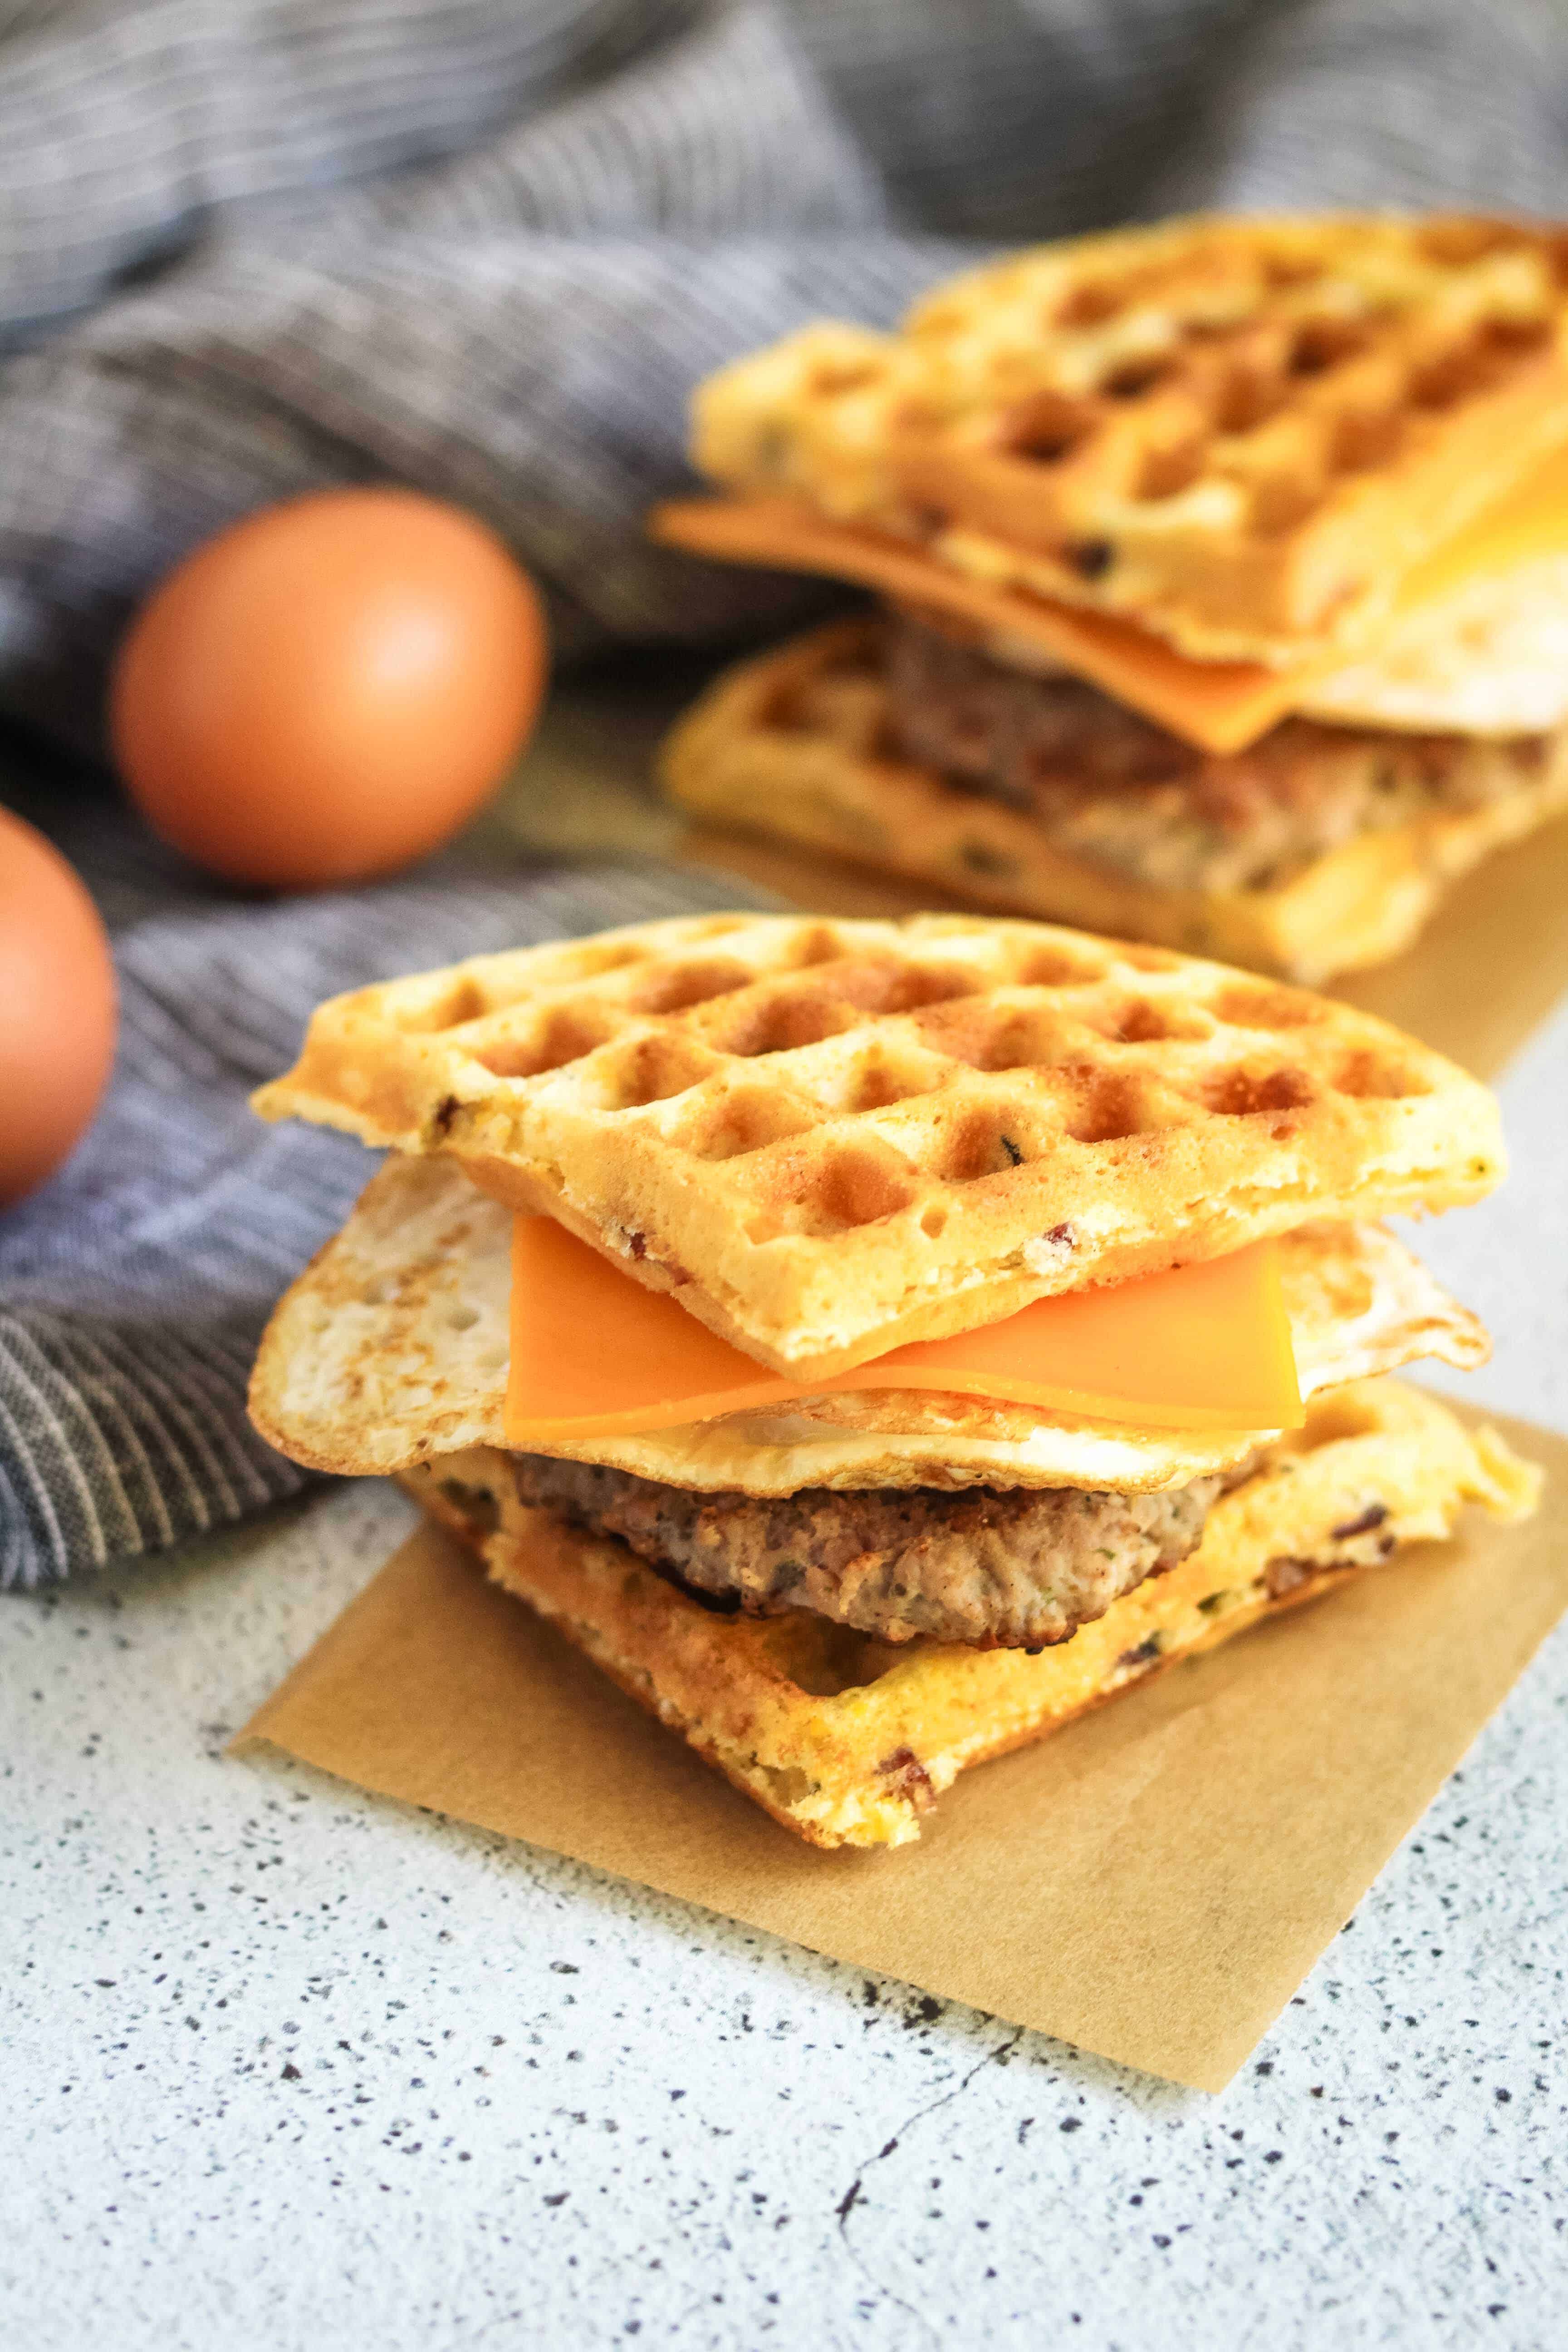 Wondering what to make with leftover waffles? These Sausage and Egg Waffle Sandwiches are the perfect breakfast sandwich for lazy weekend mornings